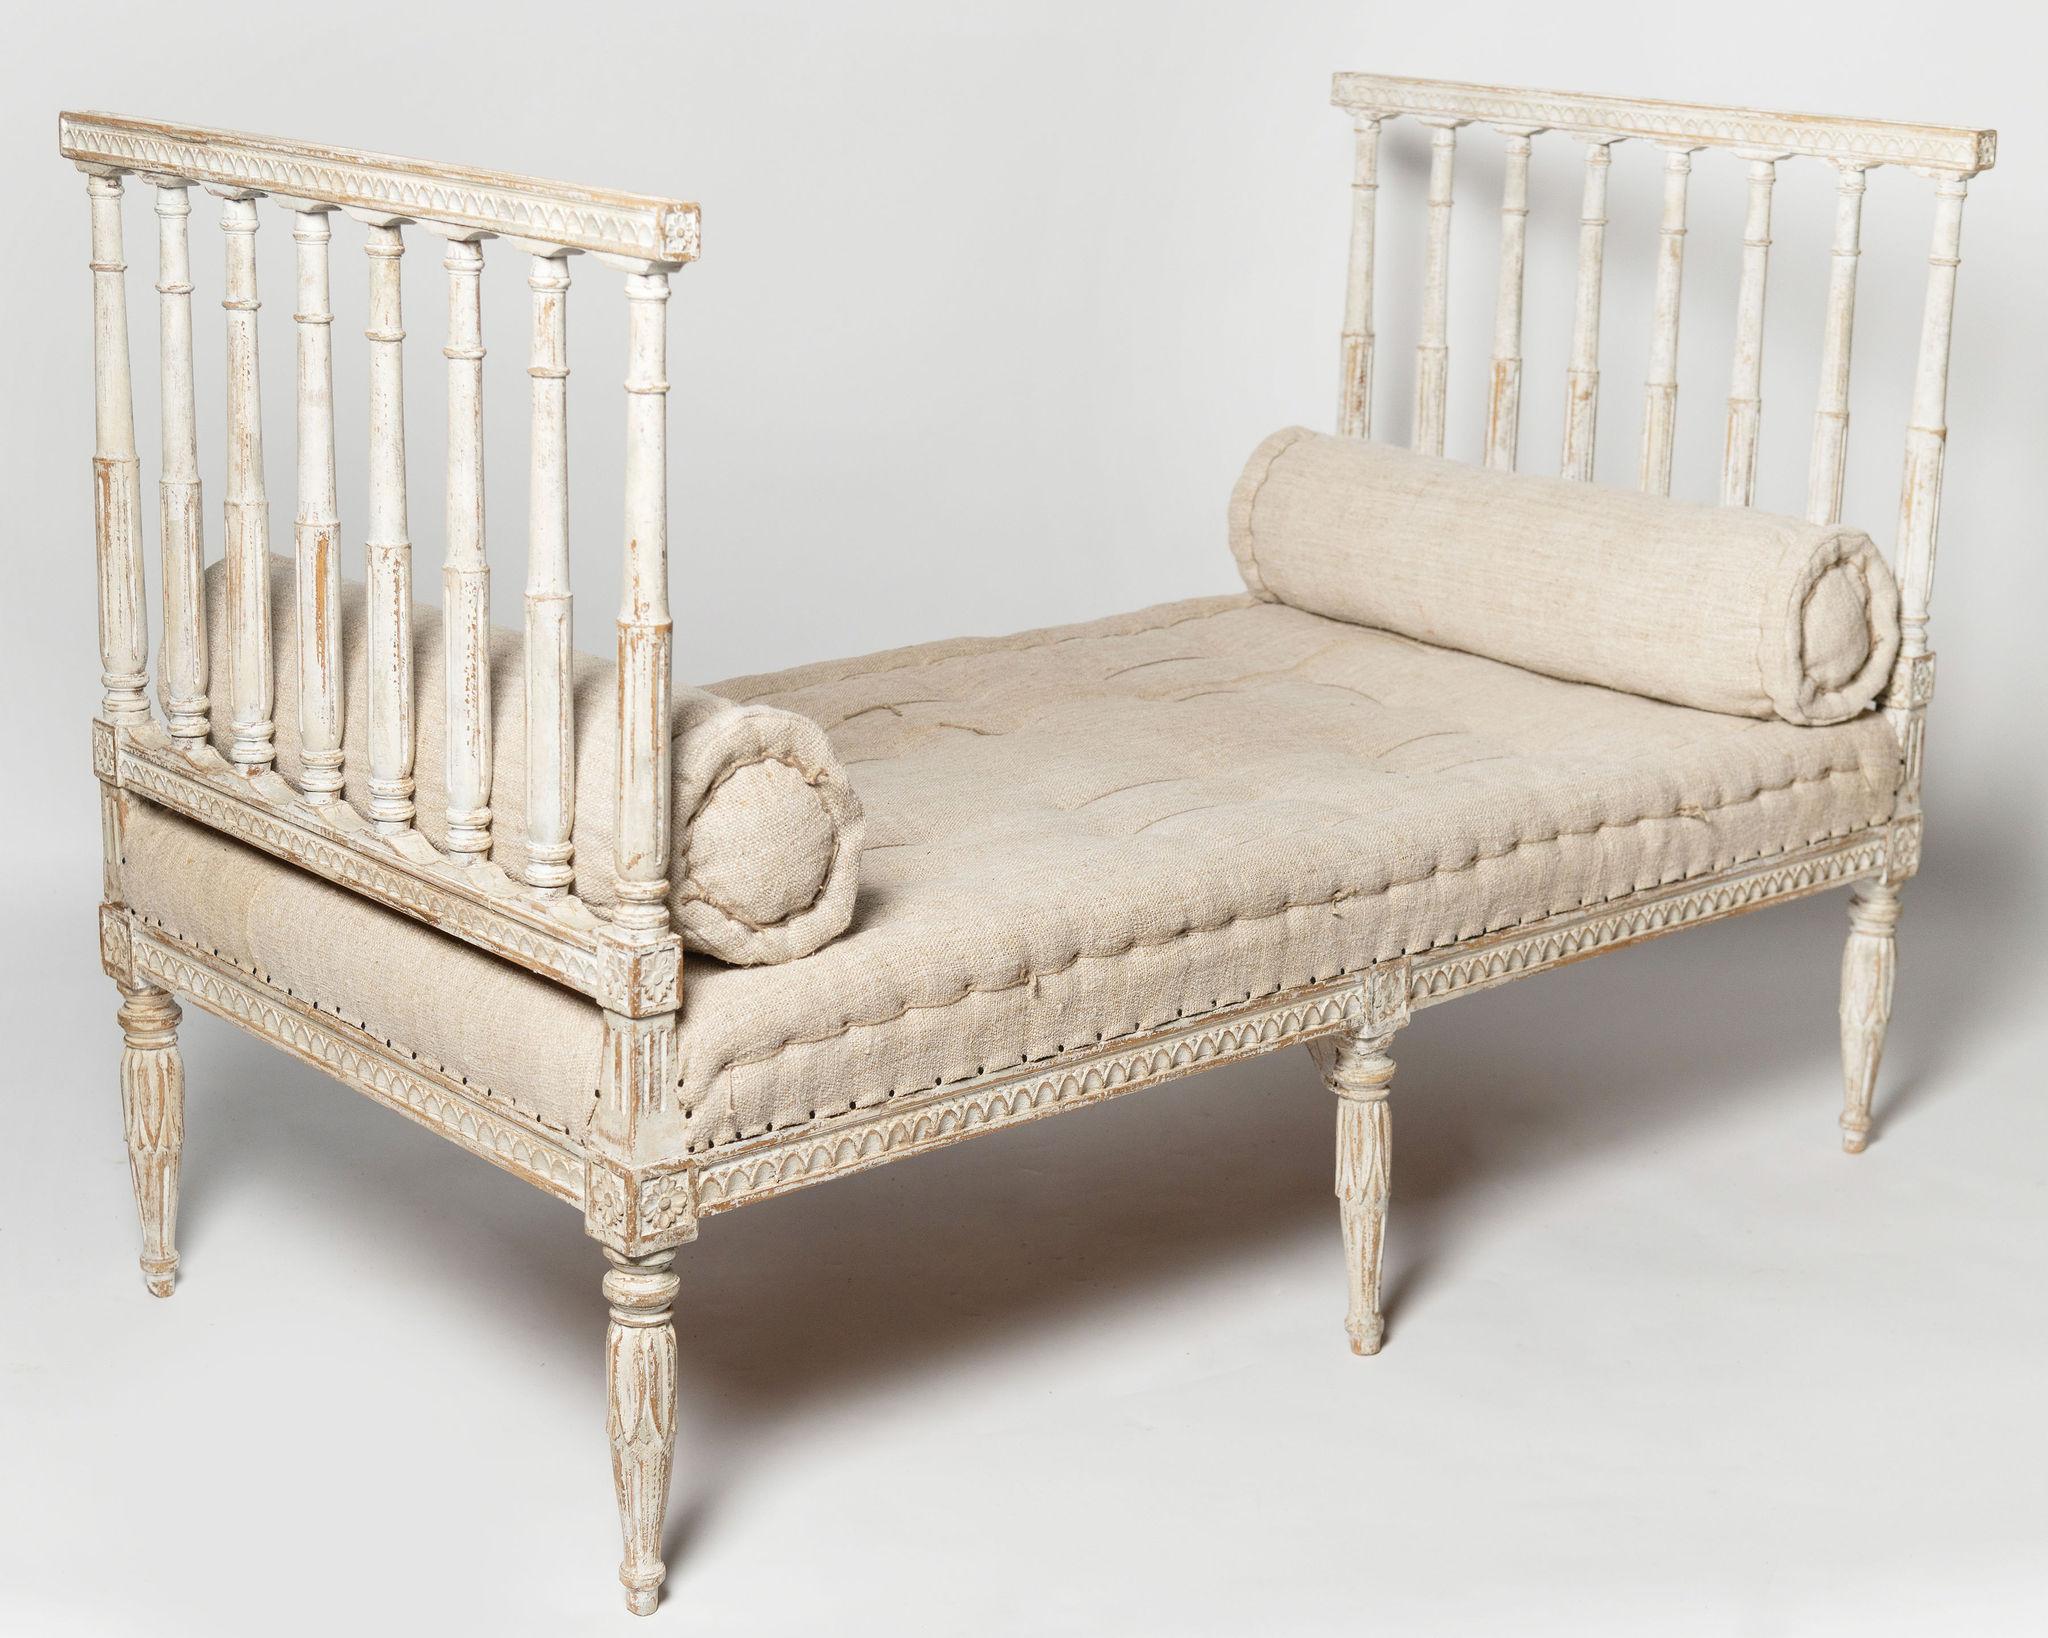 Antique Swedish daybed, sofa, stool, c1800, gustavian, Swedish upholstery   For Sale 5